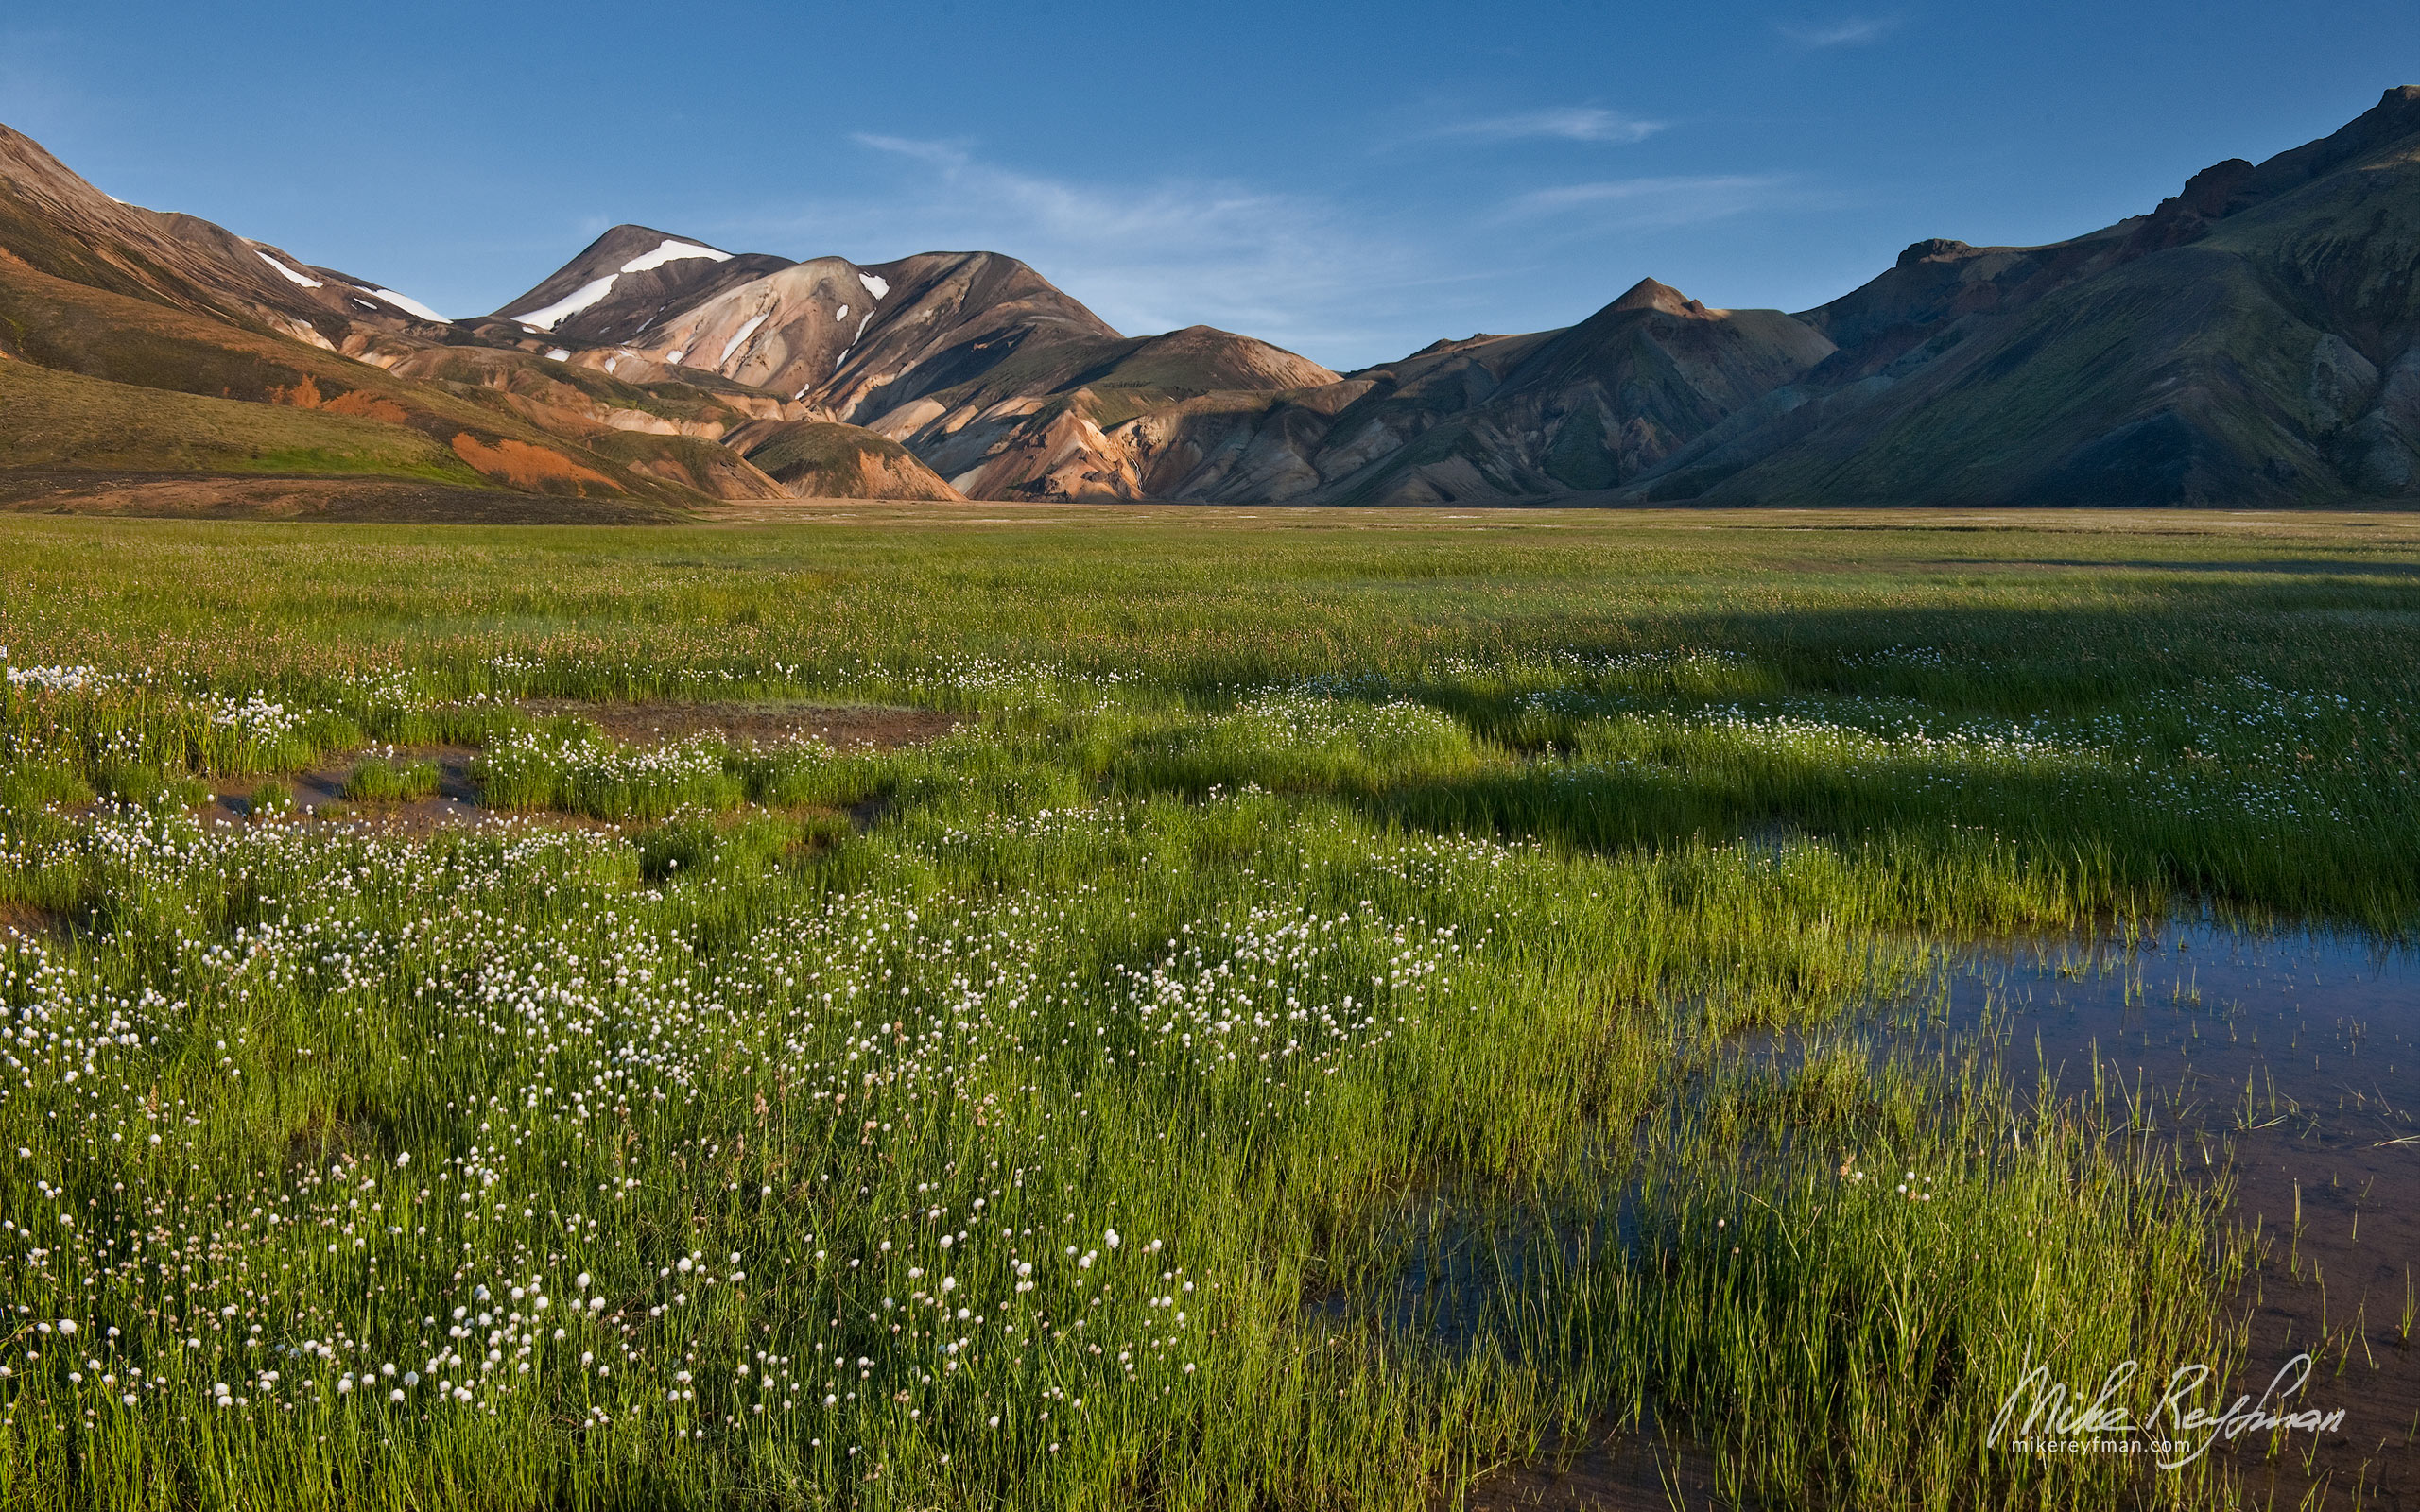 Cotton grass and Colored Rhyolite Mountains of Landmannalaugar, Fjallabak Nature Reserve, Central Highlands, Iceland. 033-IC-GP _M3X5420 - Rhyolite Mountains, Crater Lakes, Geothermal Areas, Lava Fields and Glacial Rivers. Iceland.  - Mike Reyfman Photography